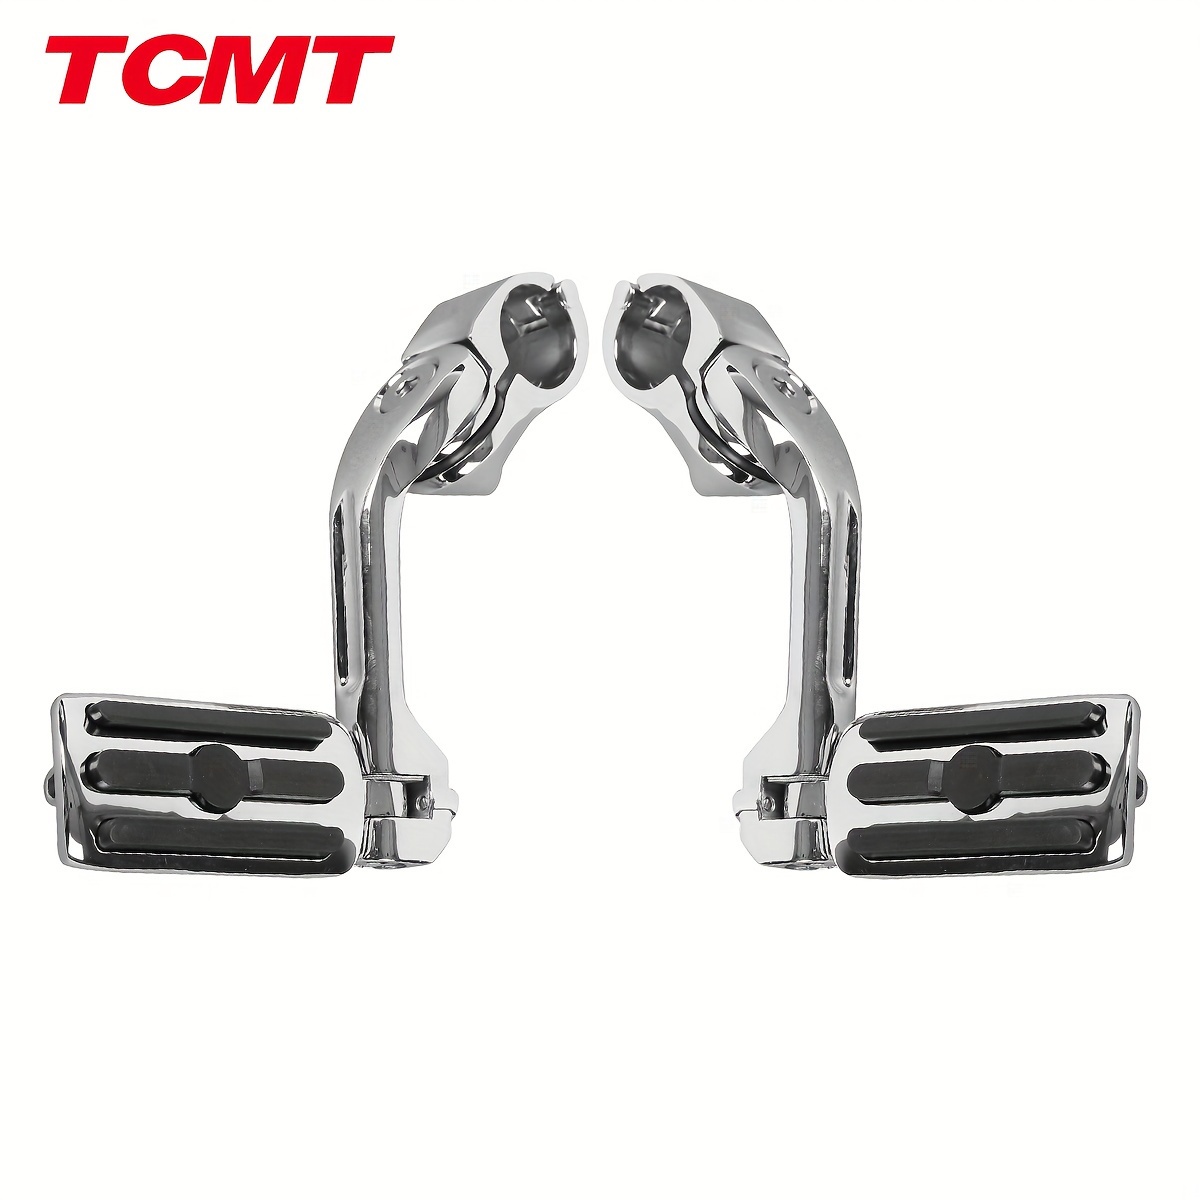 

Tcmt 1 1/4" 32mm Highway Foot Pegs Long Mount Crash Engine Guard Fit For Harley For Softail Street Electra Glide Road King Sportster